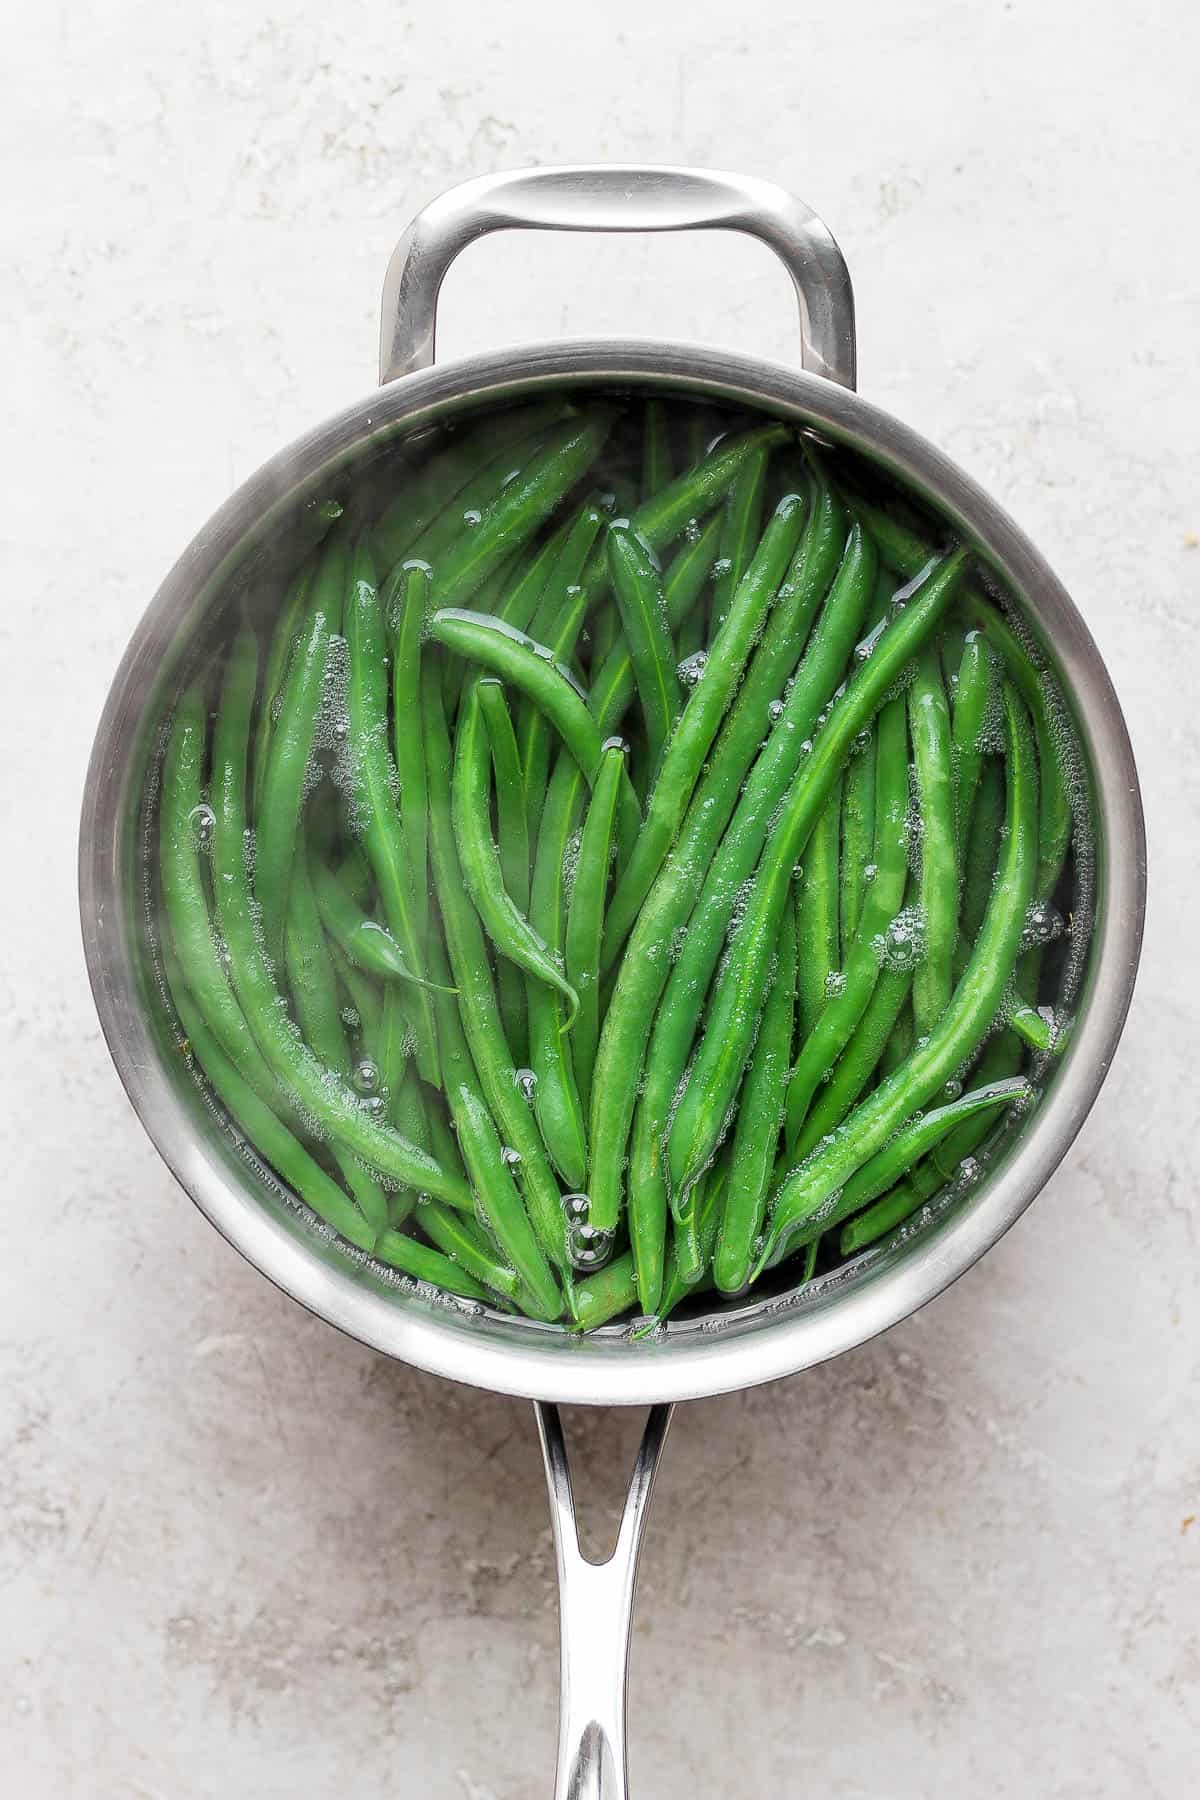 Green beans simmering in water.